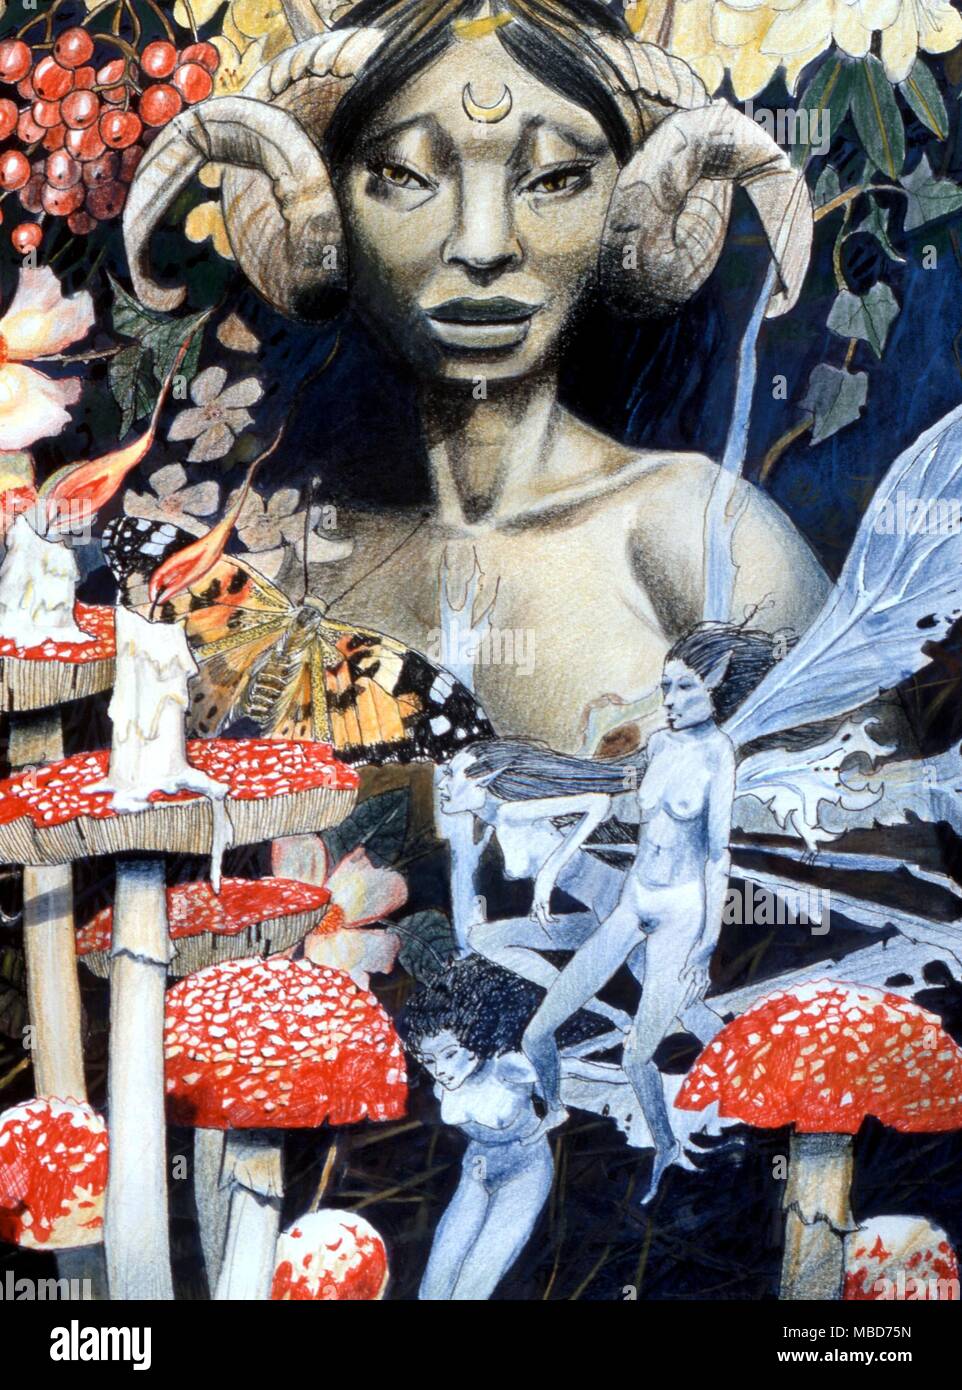 Fairies - Earth Mother, with toadstools, fairies and candles. Painting in watercolours, gouache, pencil and ink, by Gordon Wain, 'Earth Mother', 1991. Stock Photo